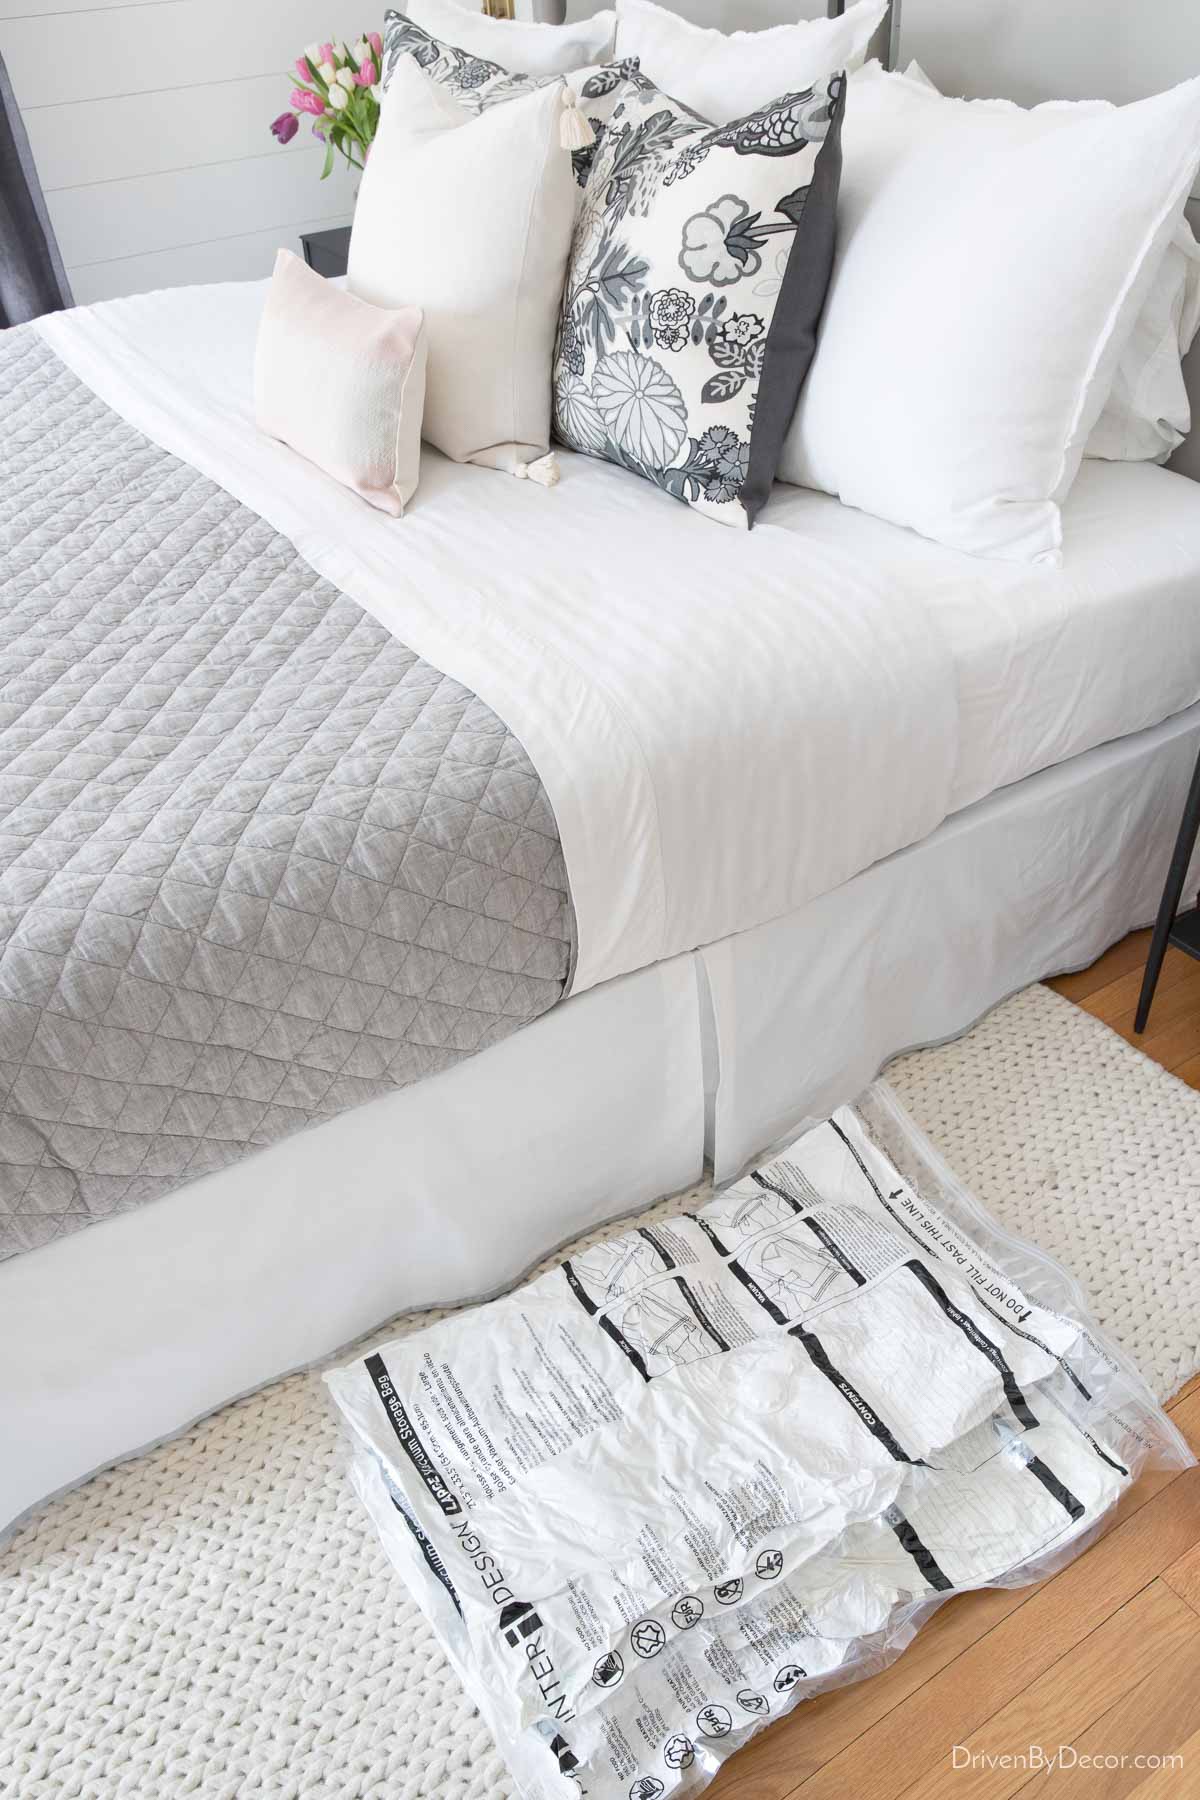 Vacuum storage bags going under a bed as a bedroom organization idea